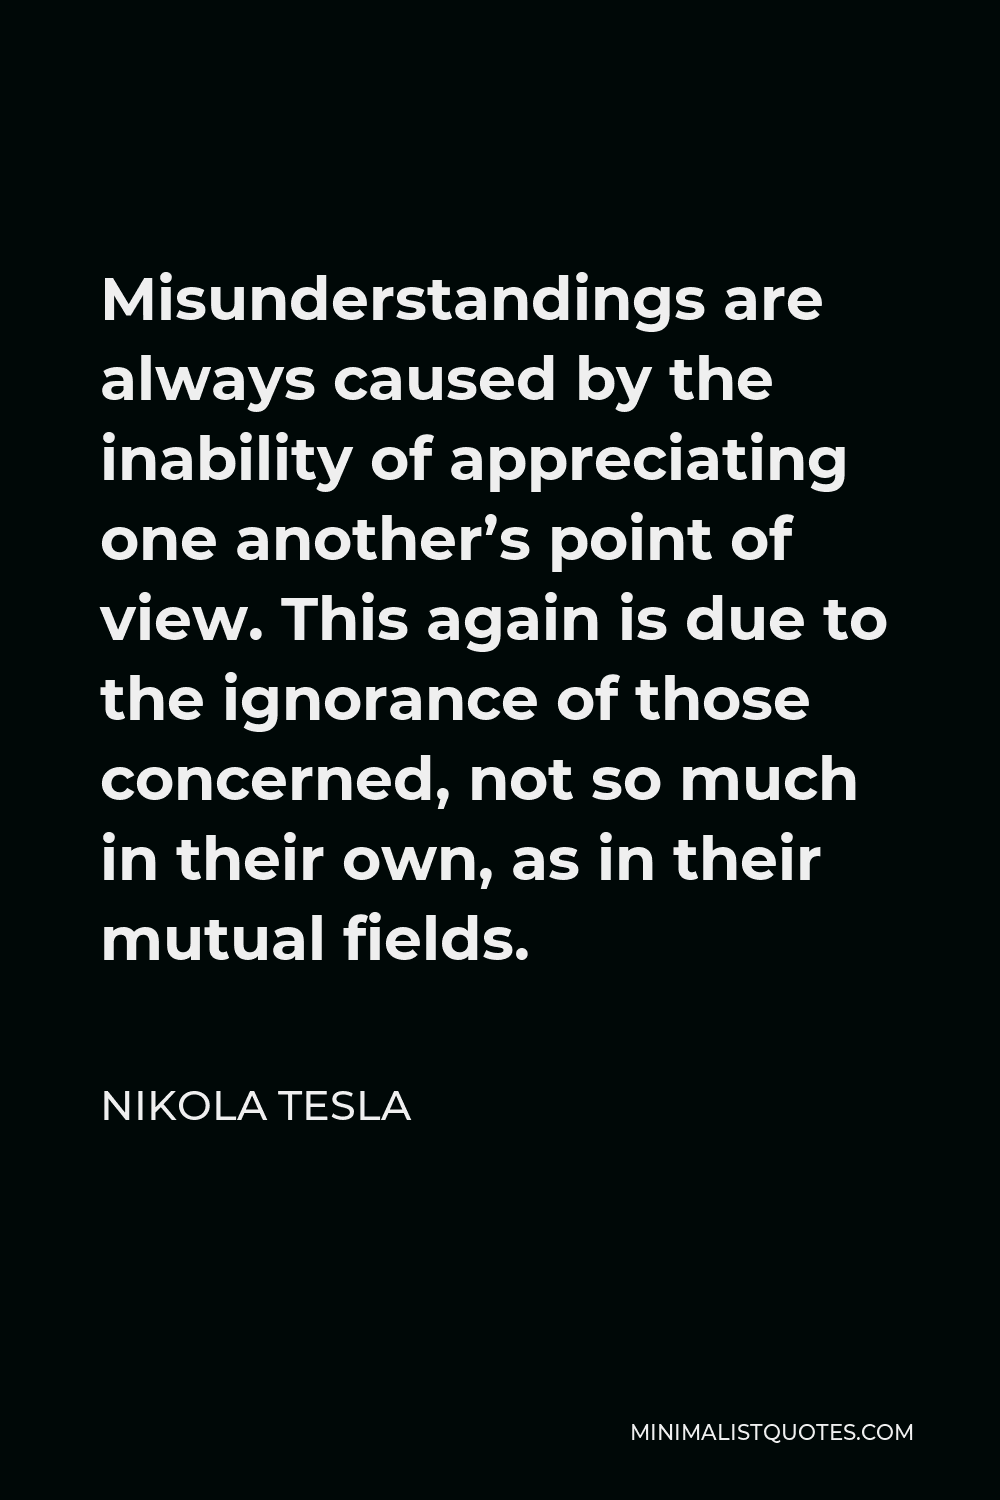 Nikola Tesla Quote - Misunderstandings are always caused by the inability of appreciating one another’s point of view. This again is due to the ignorance of those concerned, not so much in their own, as in their mutual fields.